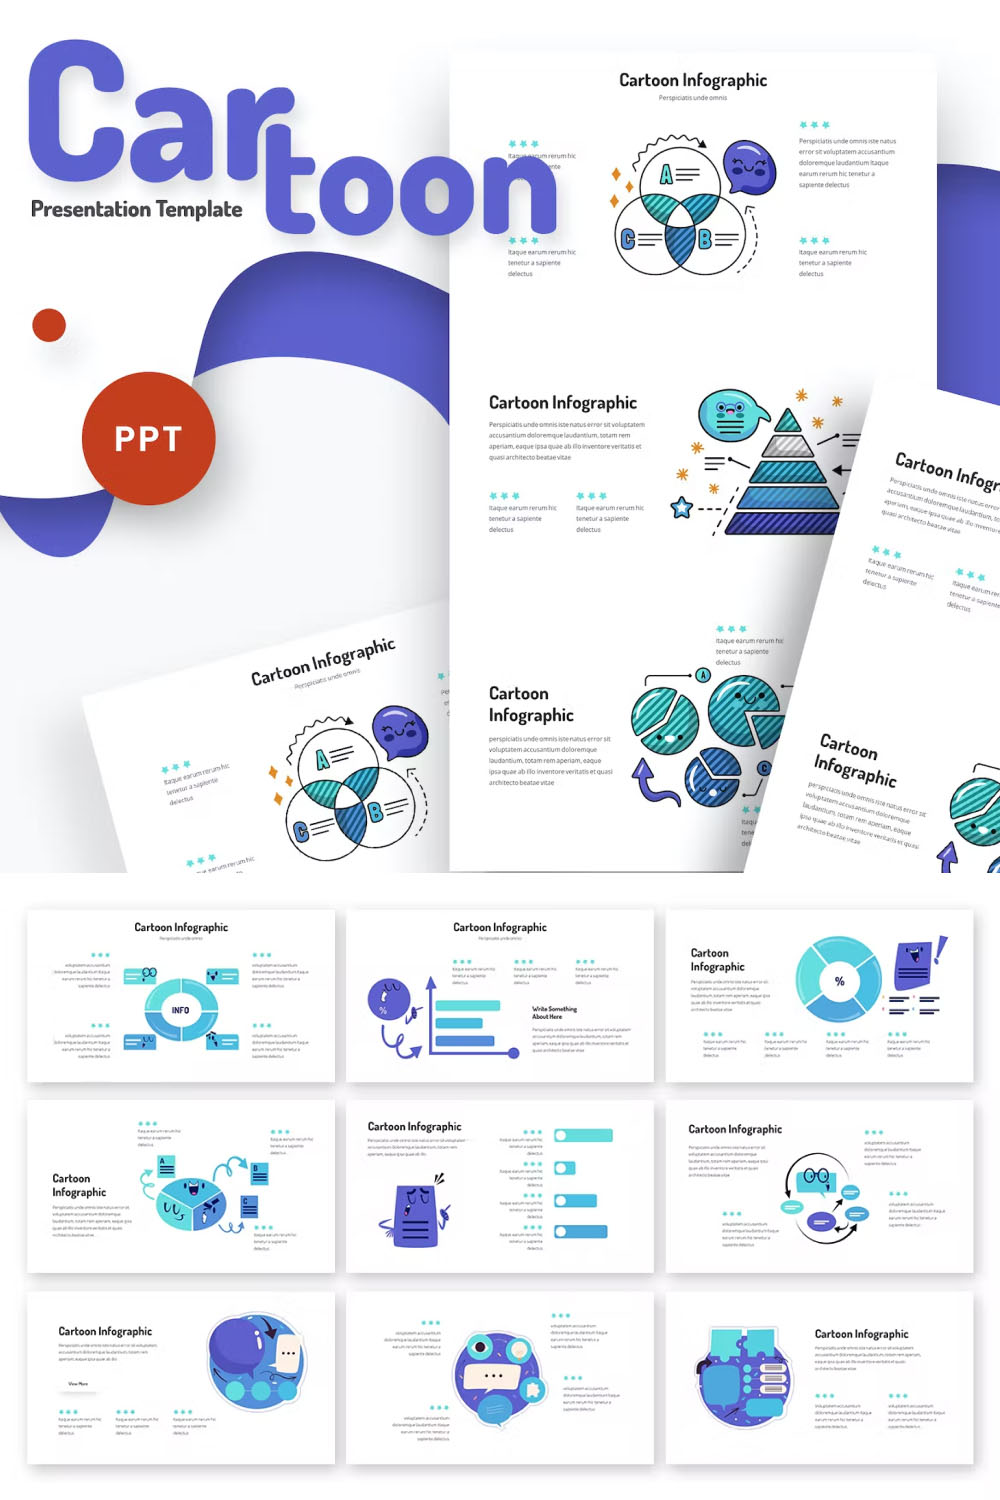 Preview cartoon infographic powerpoint template.